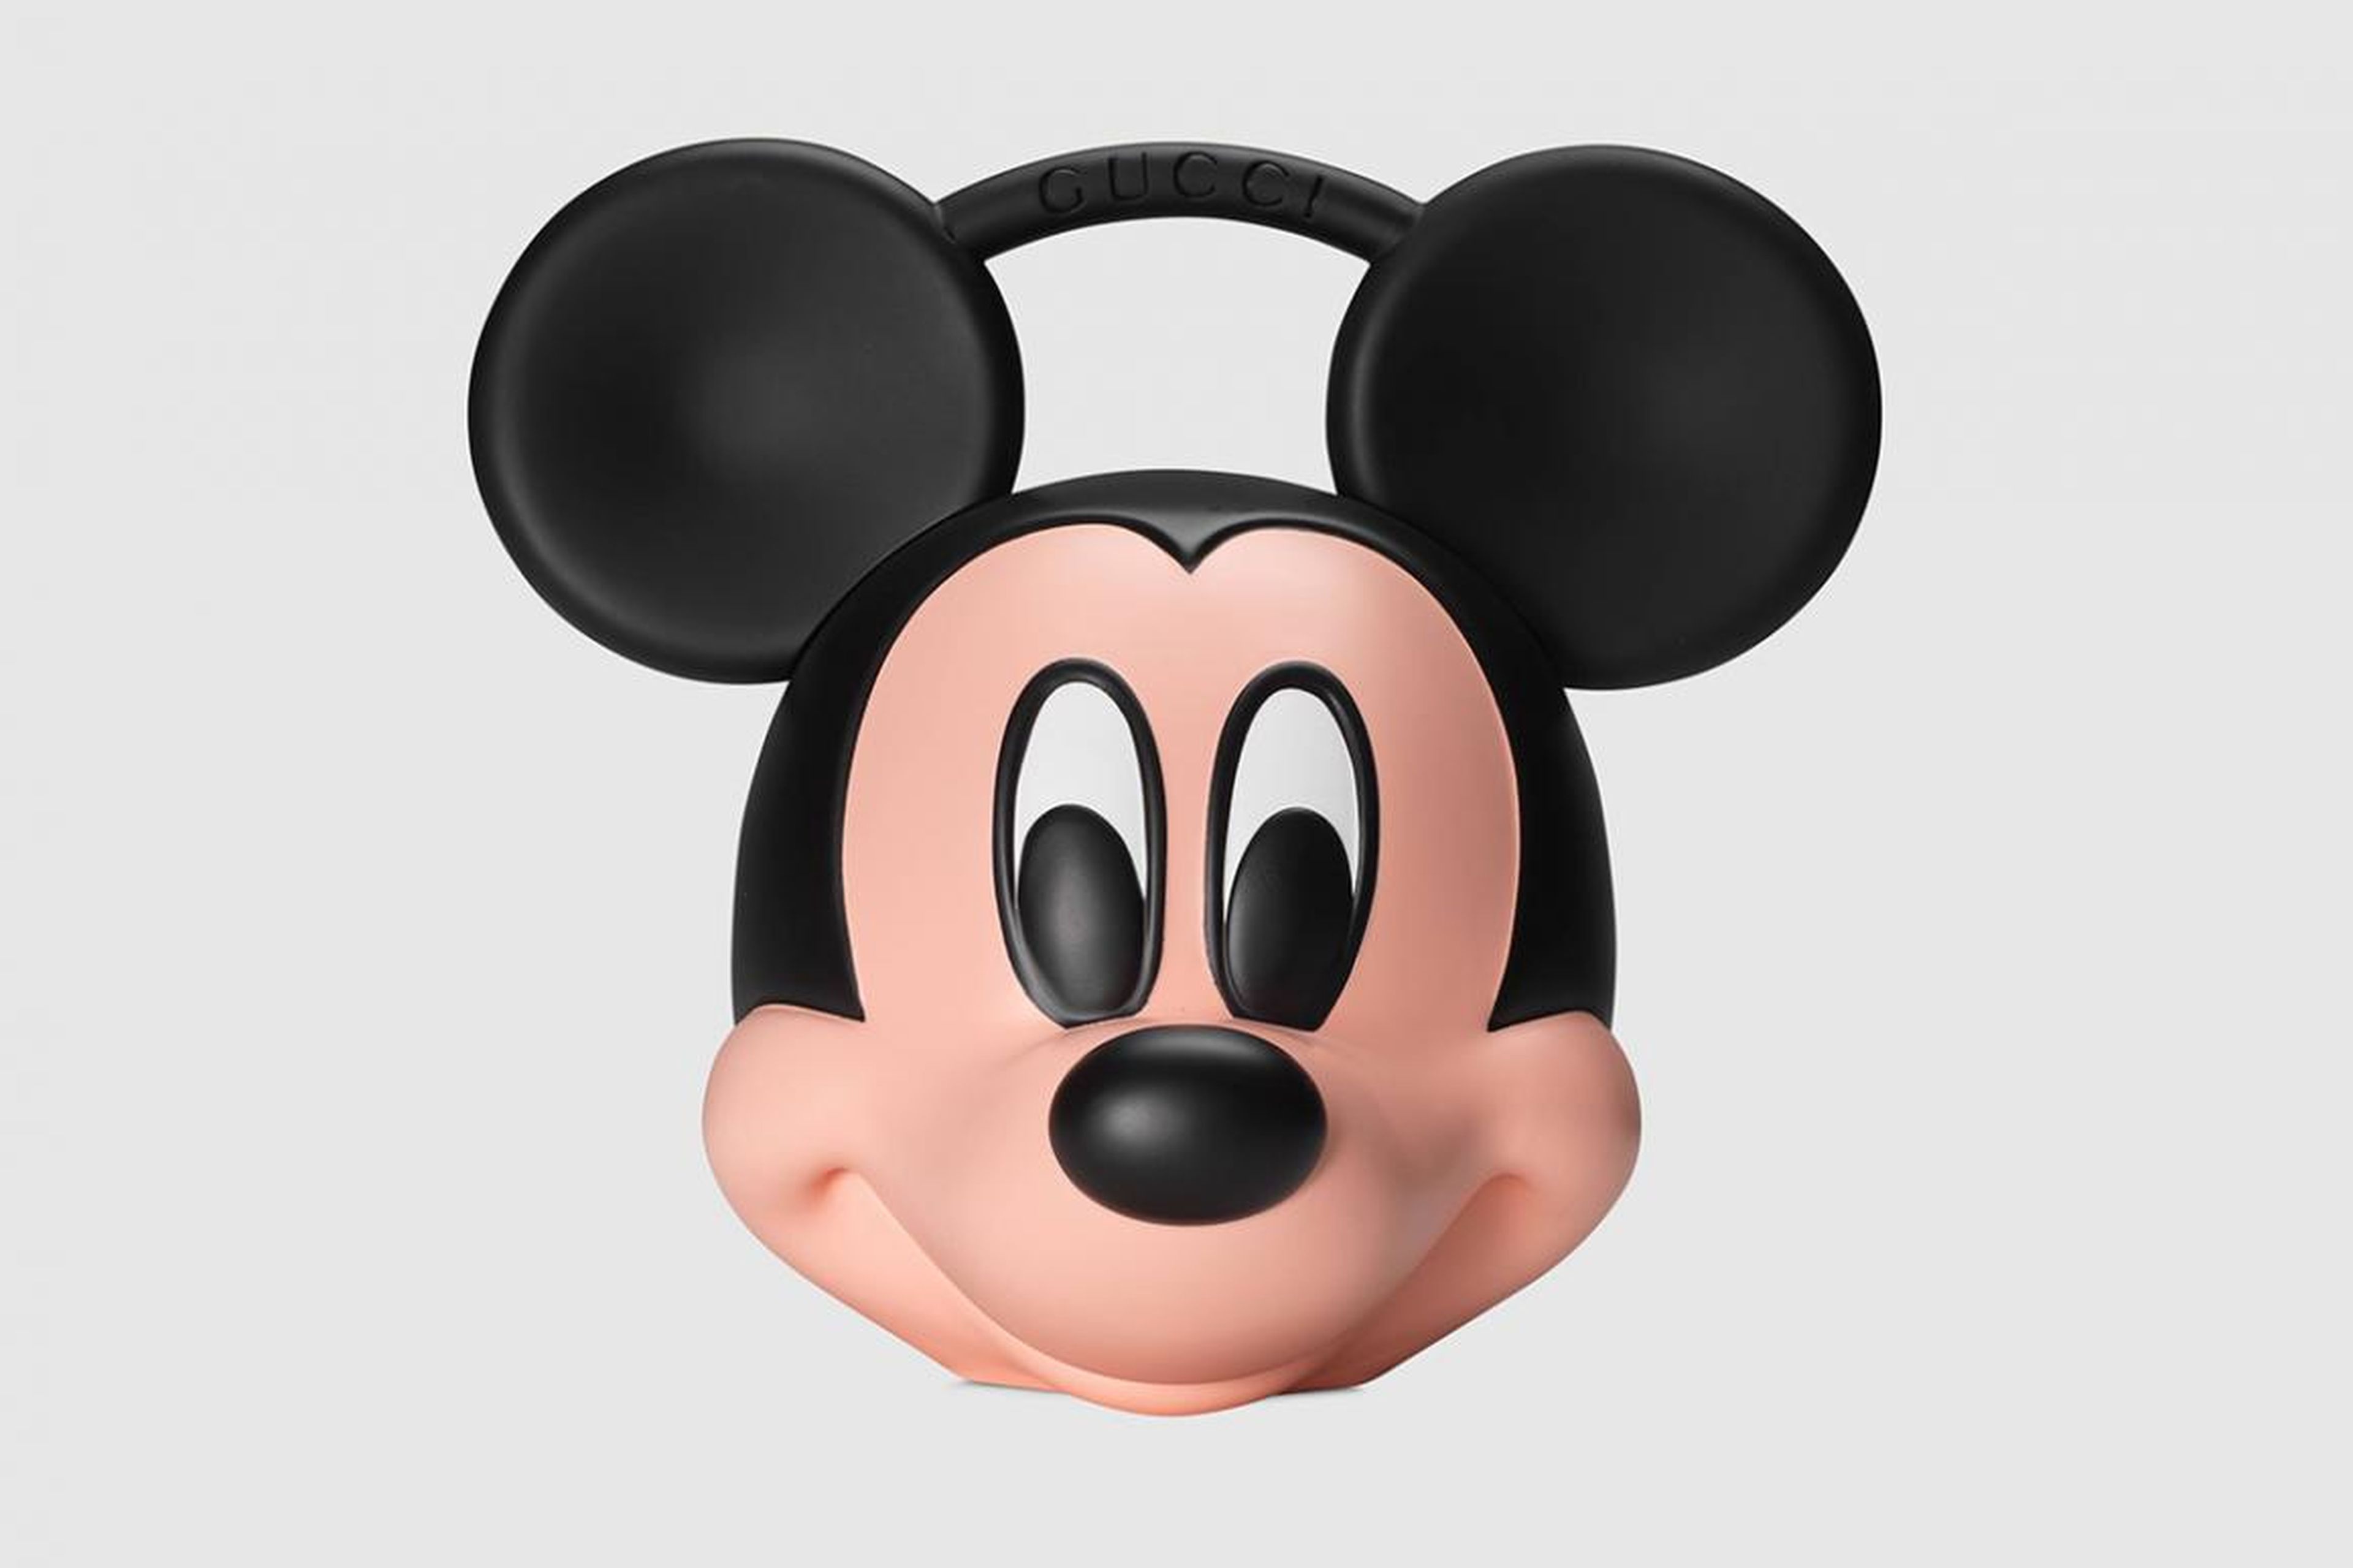 The bag marks the 90th birthday of Mickey Mouse.